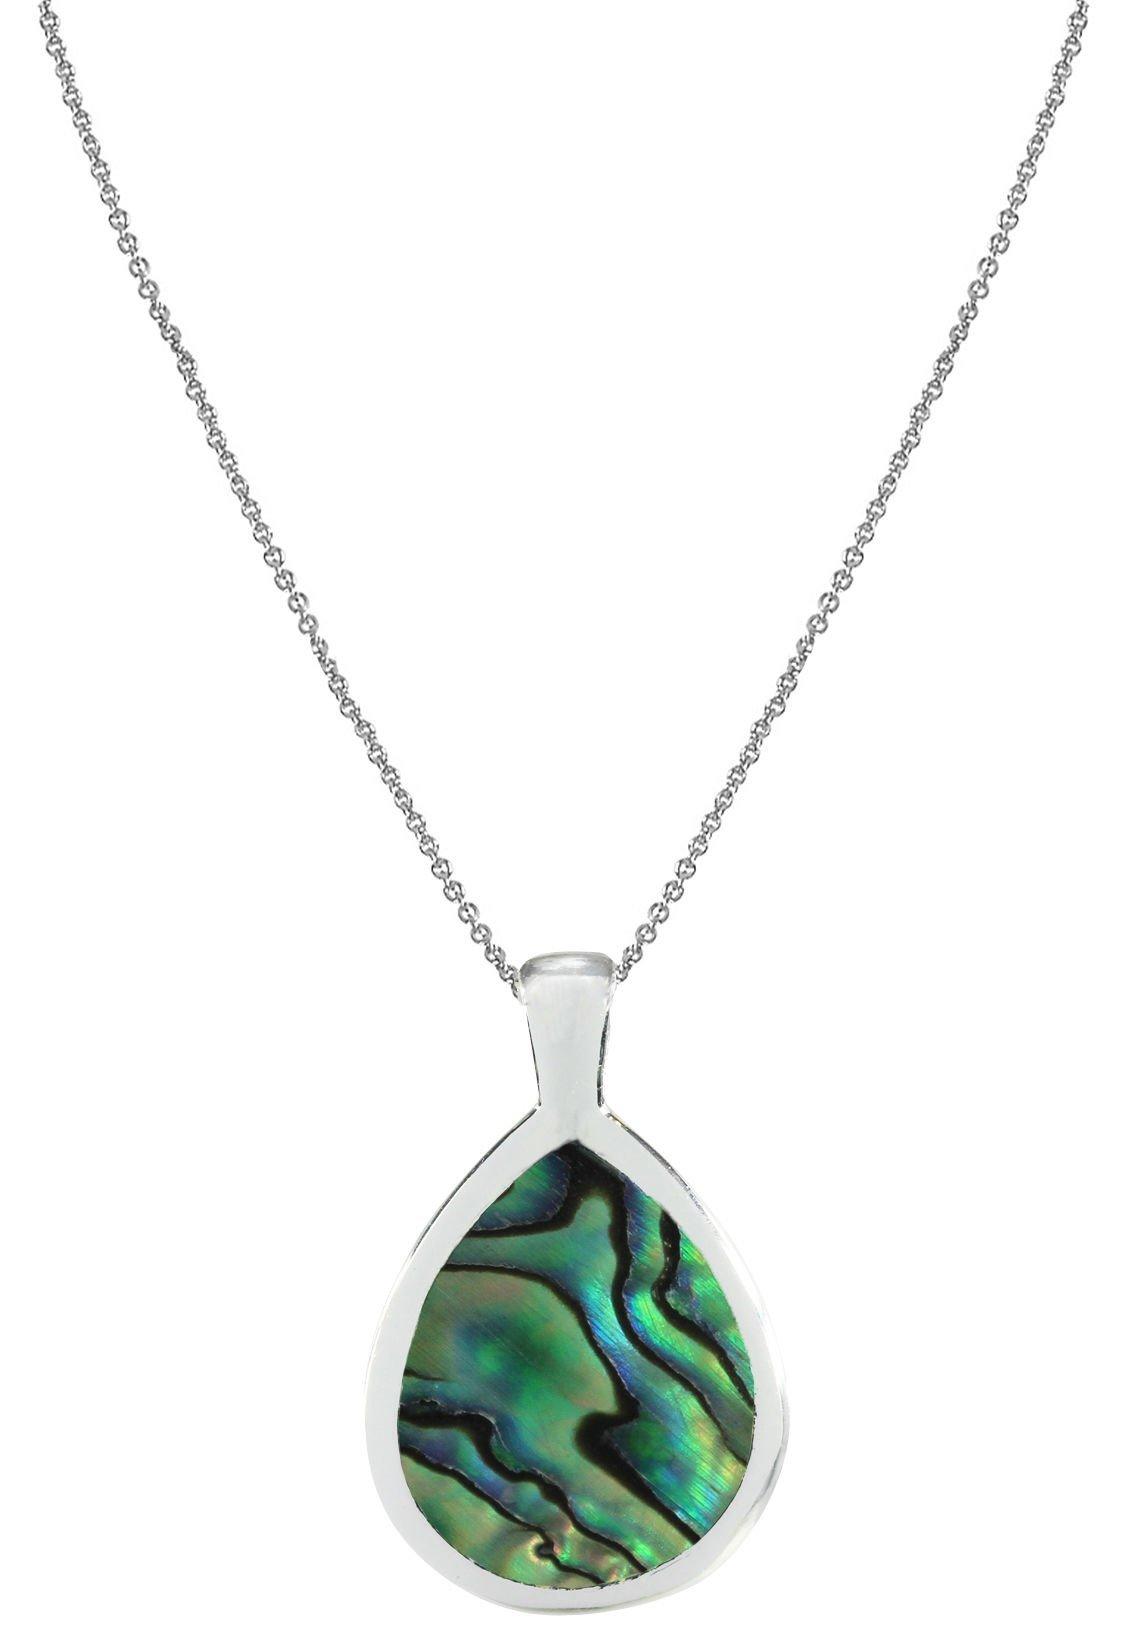 Silver Plated Abalone Teardrop Pendant Necklace